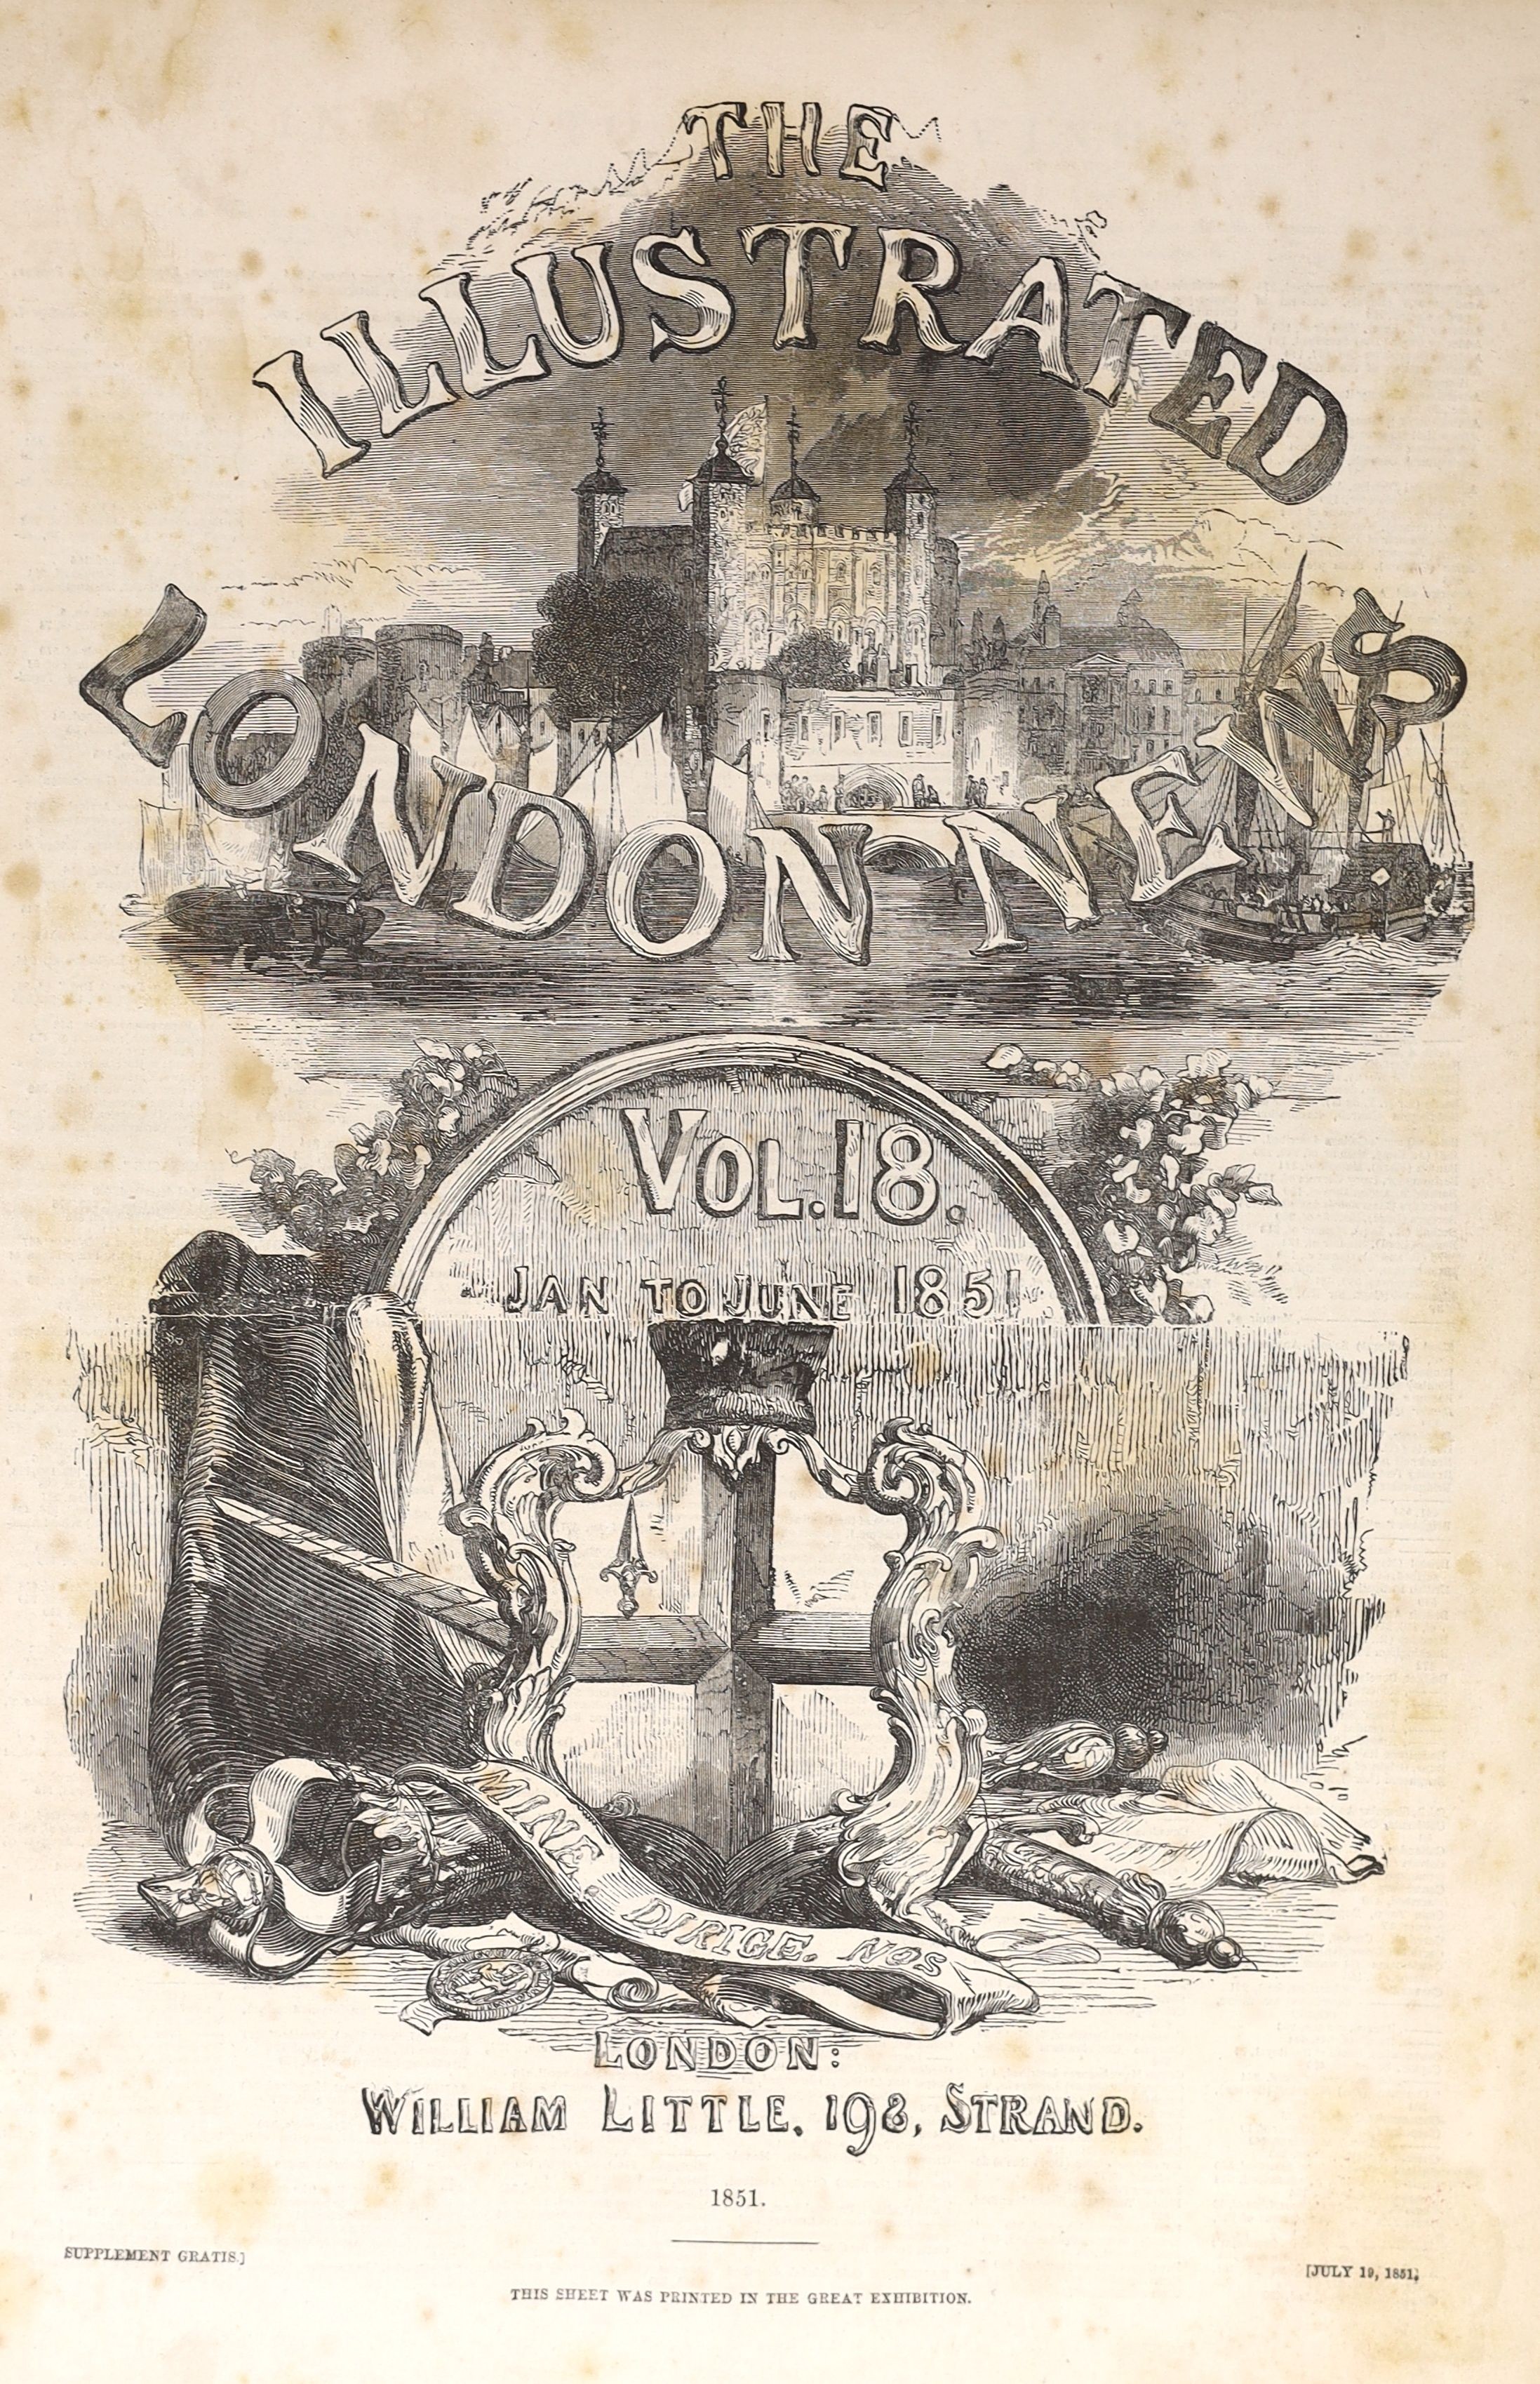 The Illustrated London News, vols 18-21, (Jan. - June, 1851, and July - Dec. 1852) bound in 2, folio, publisher’s cloth gilt, contents include The Great Exhibition at Crystal Palace, London, 1851-52